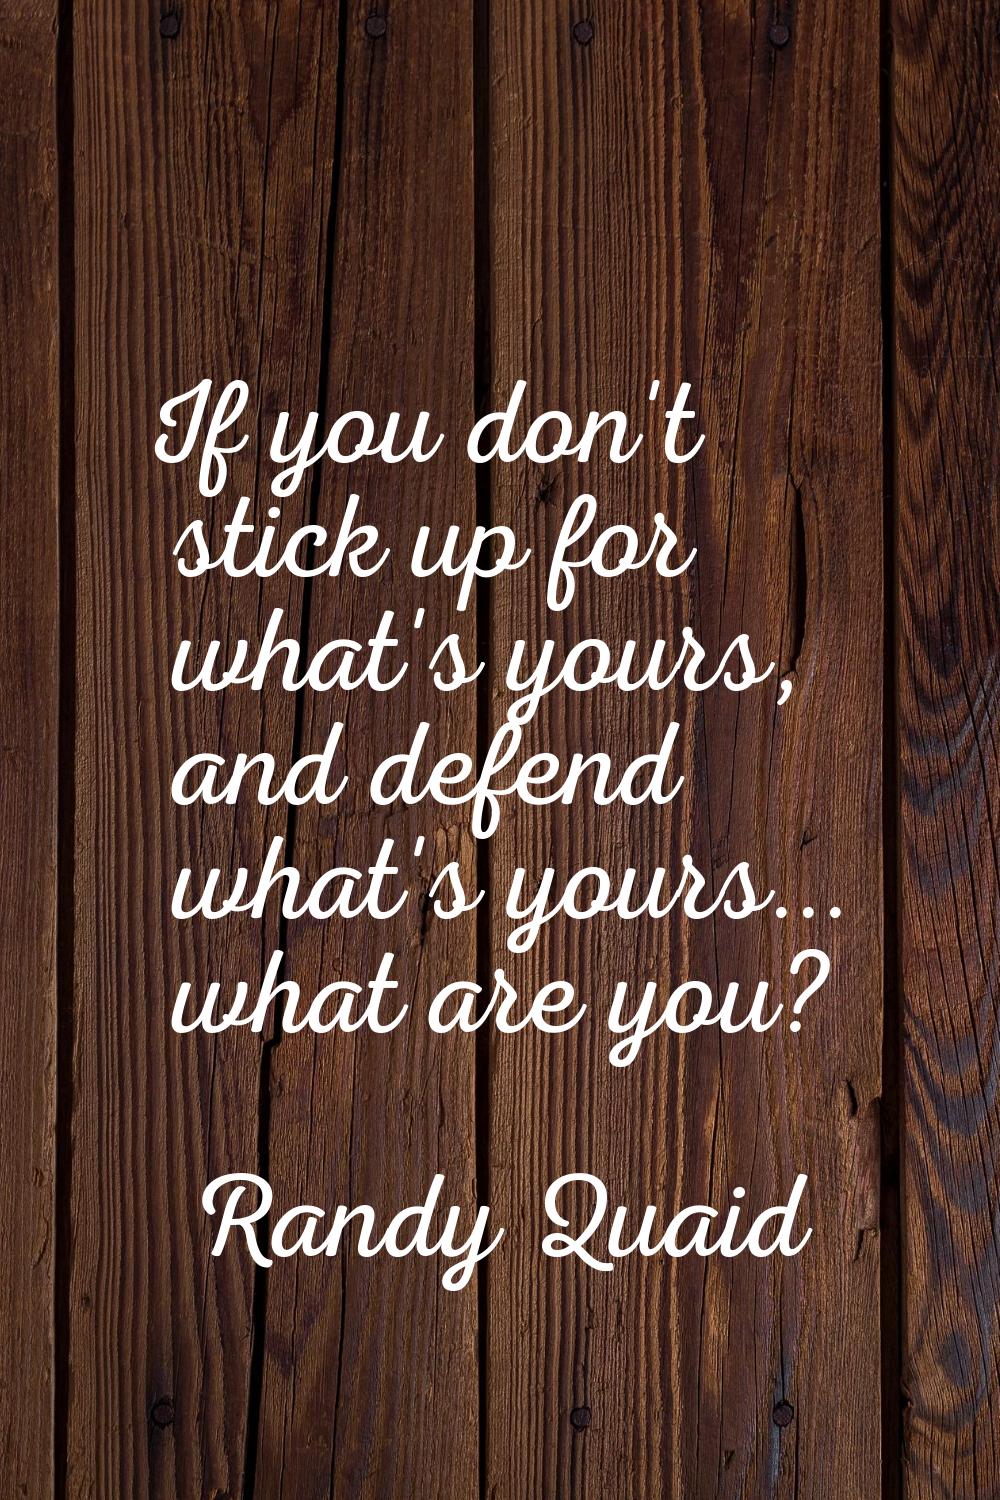 If you don't stick up for what's yours, and defend what's yours... what are you?